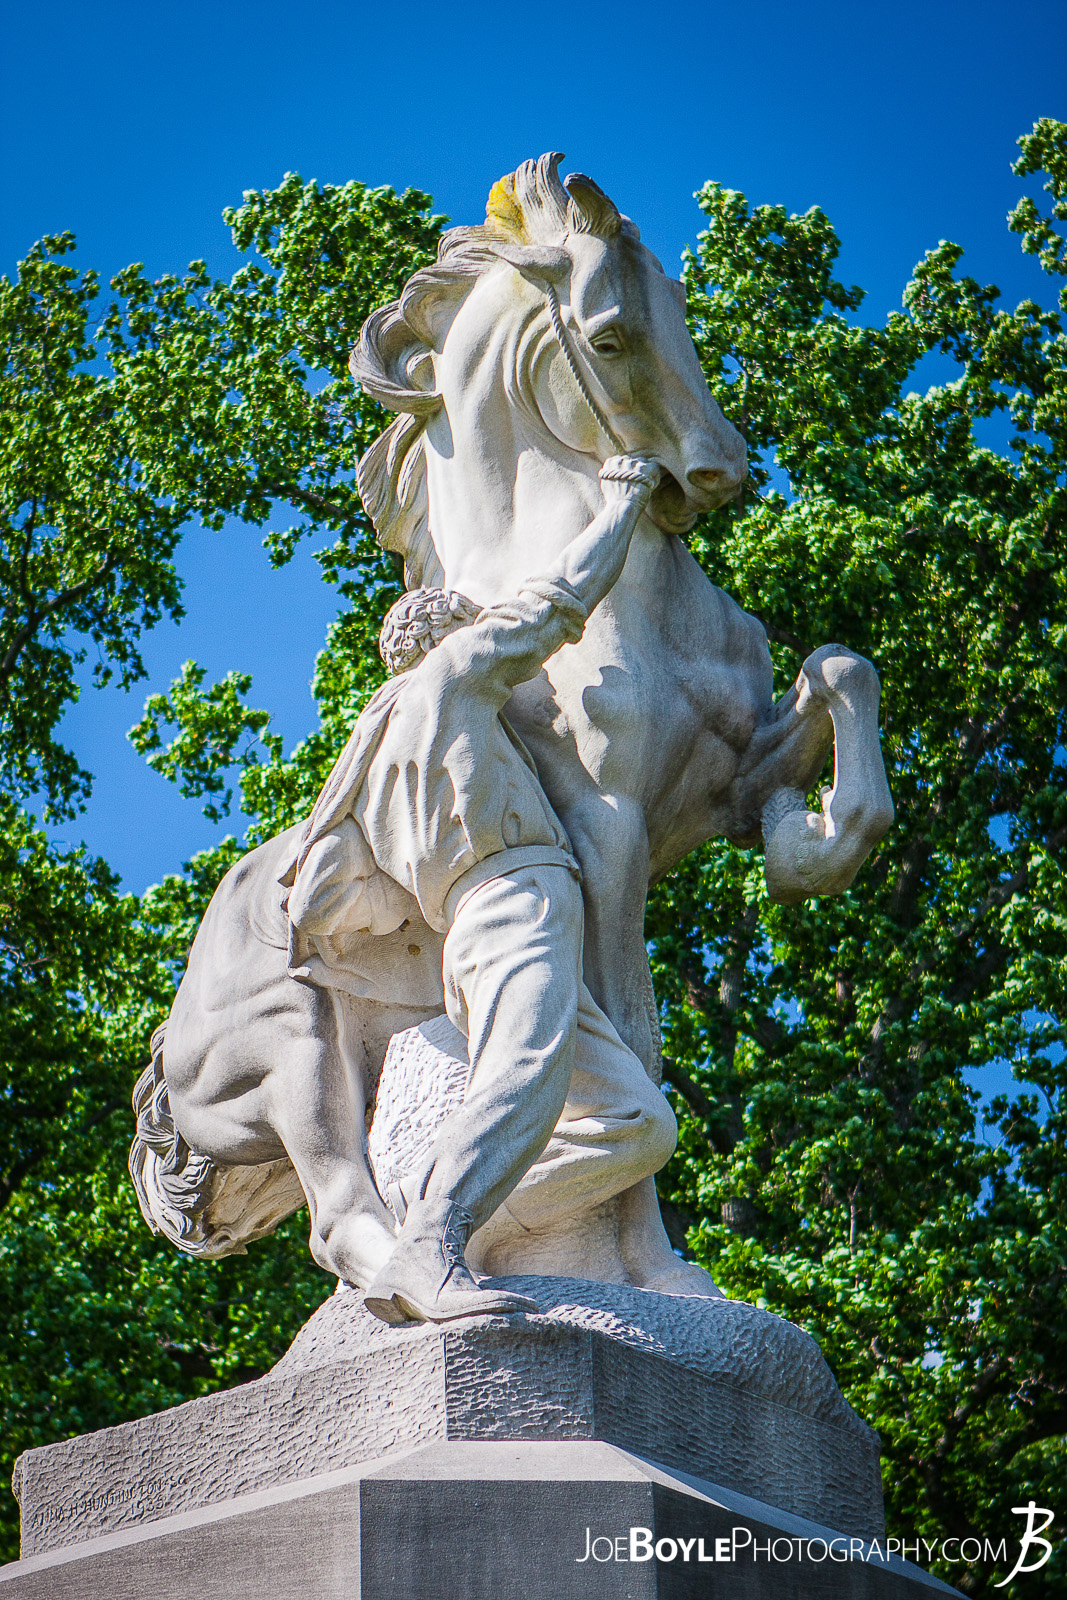  This "Conquering The Wild Statue" is found near the Lion's Bridge, a part of the Mariner's Museum in Virginia. 